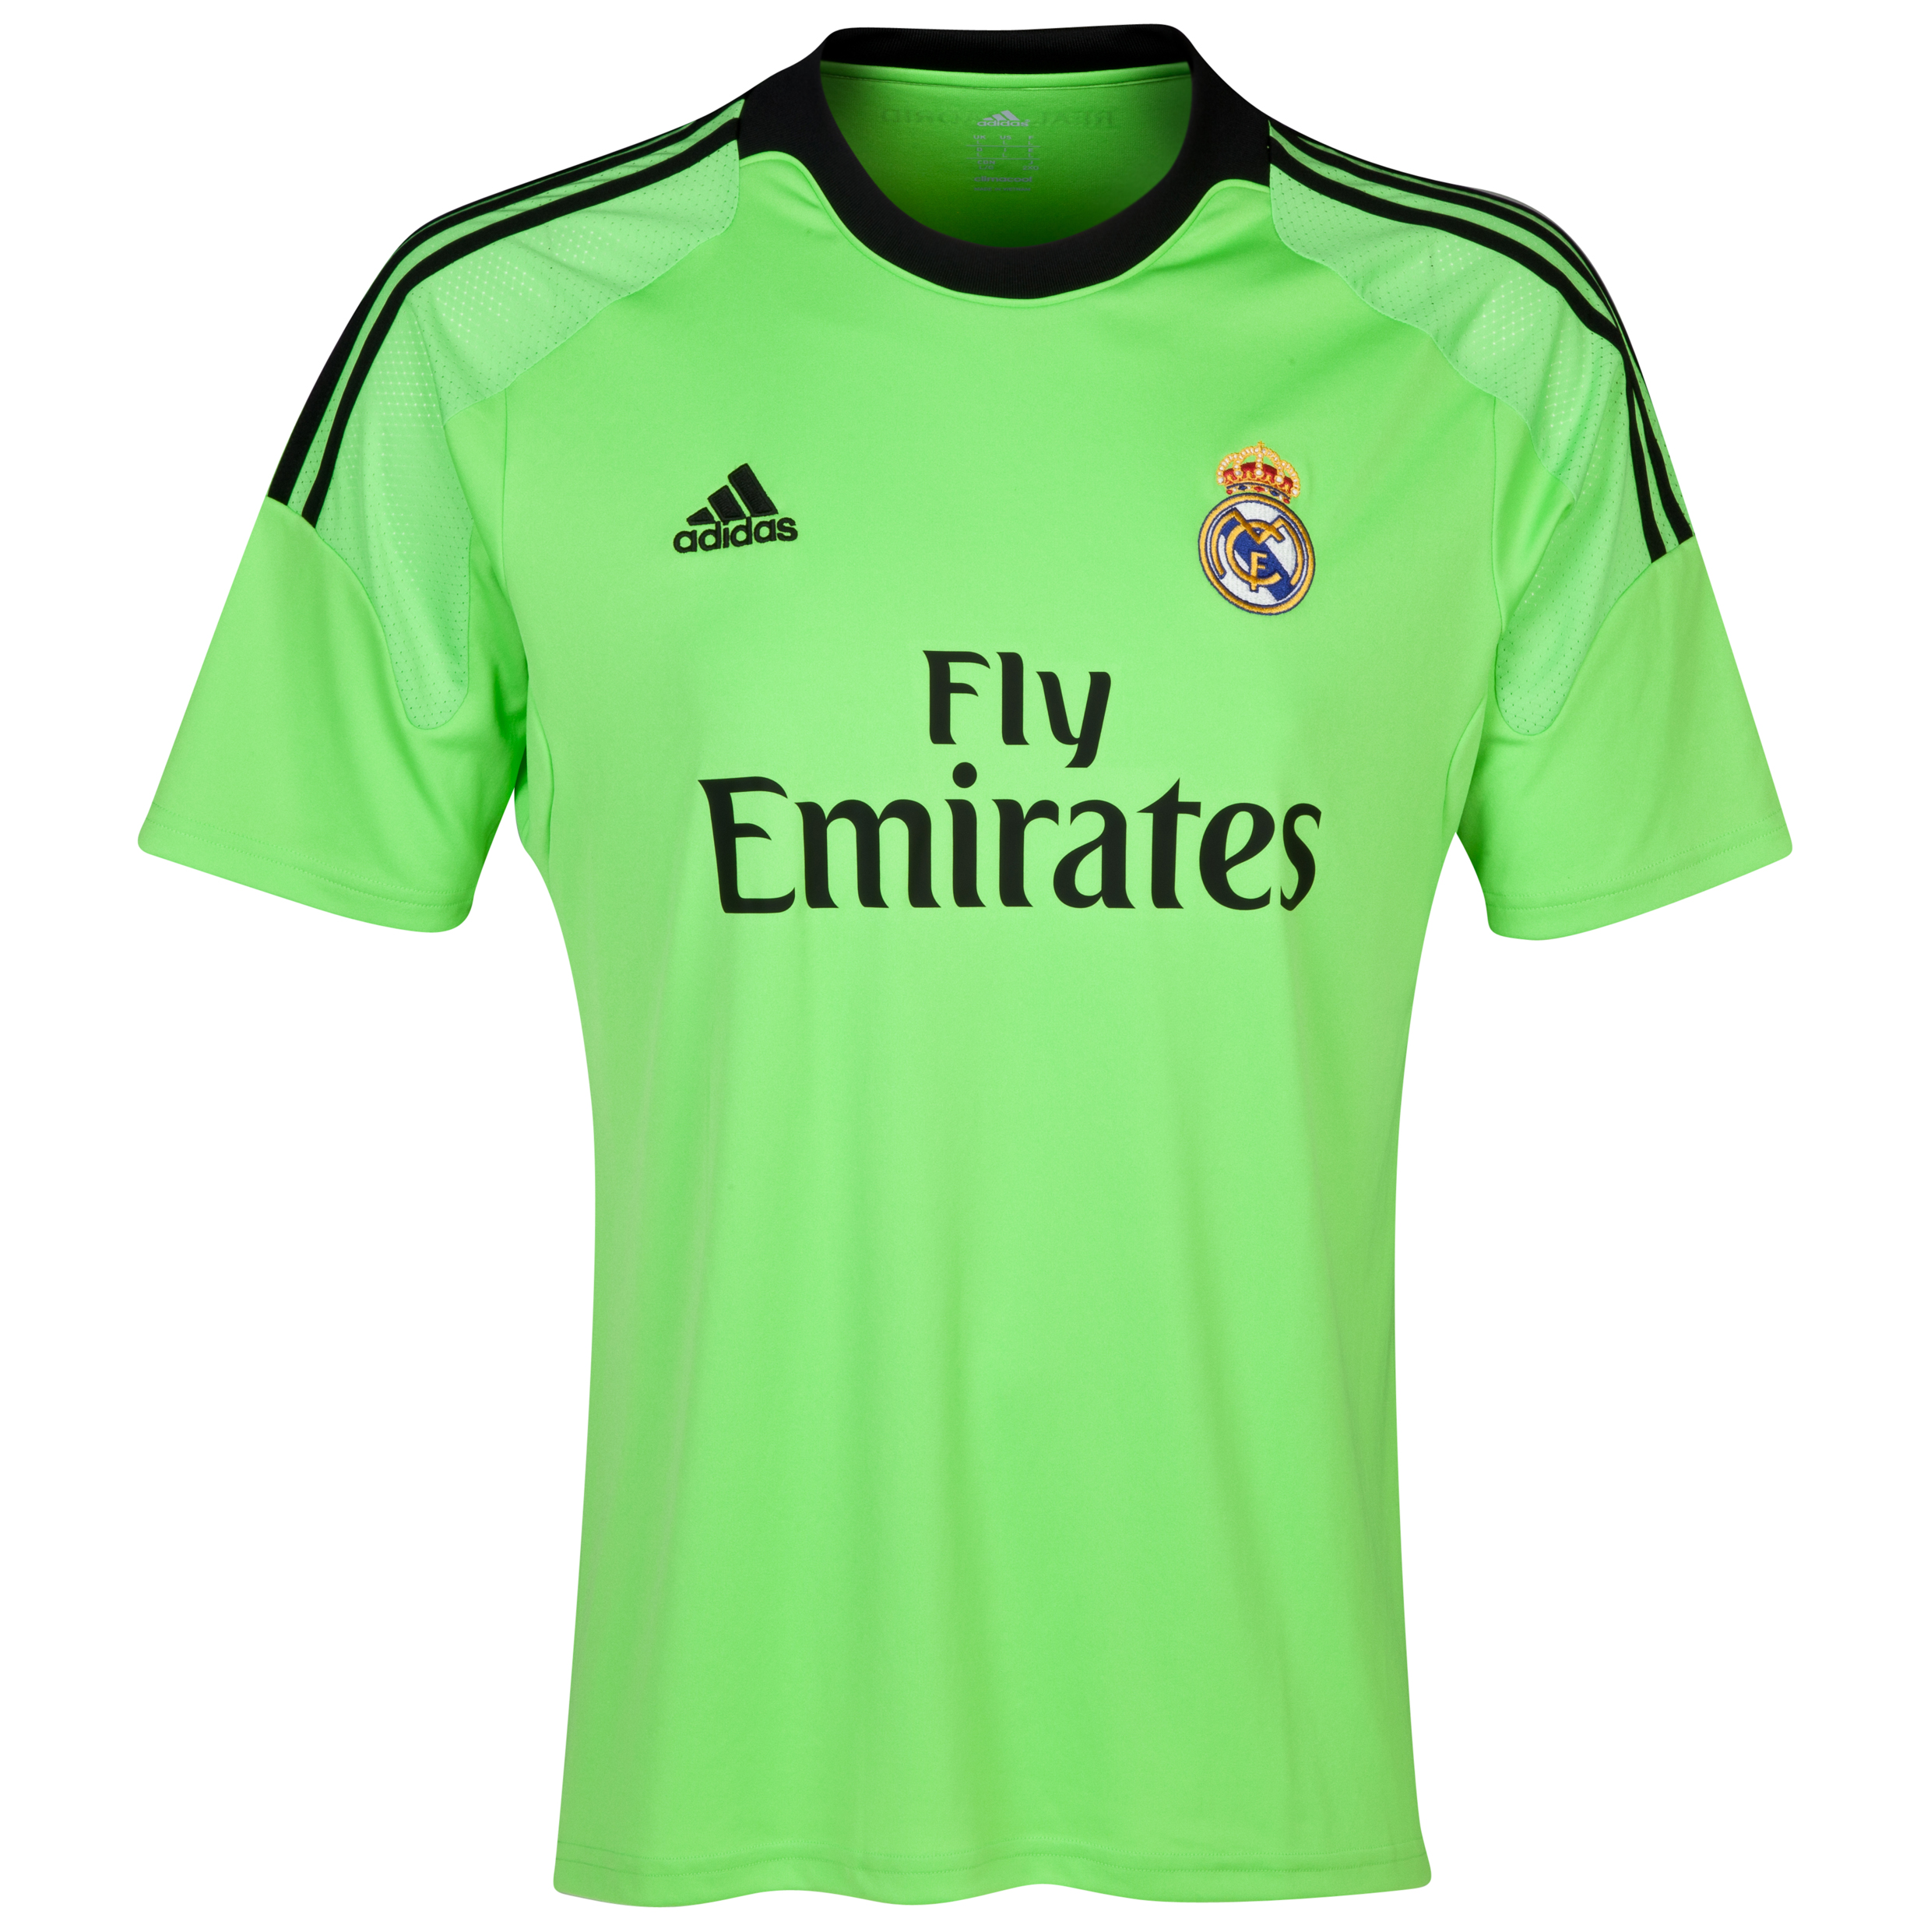 http://images.kitbag.com/rm-131503.jpg?width=400&height=400&quality=95?width=400&height=400&quality=95